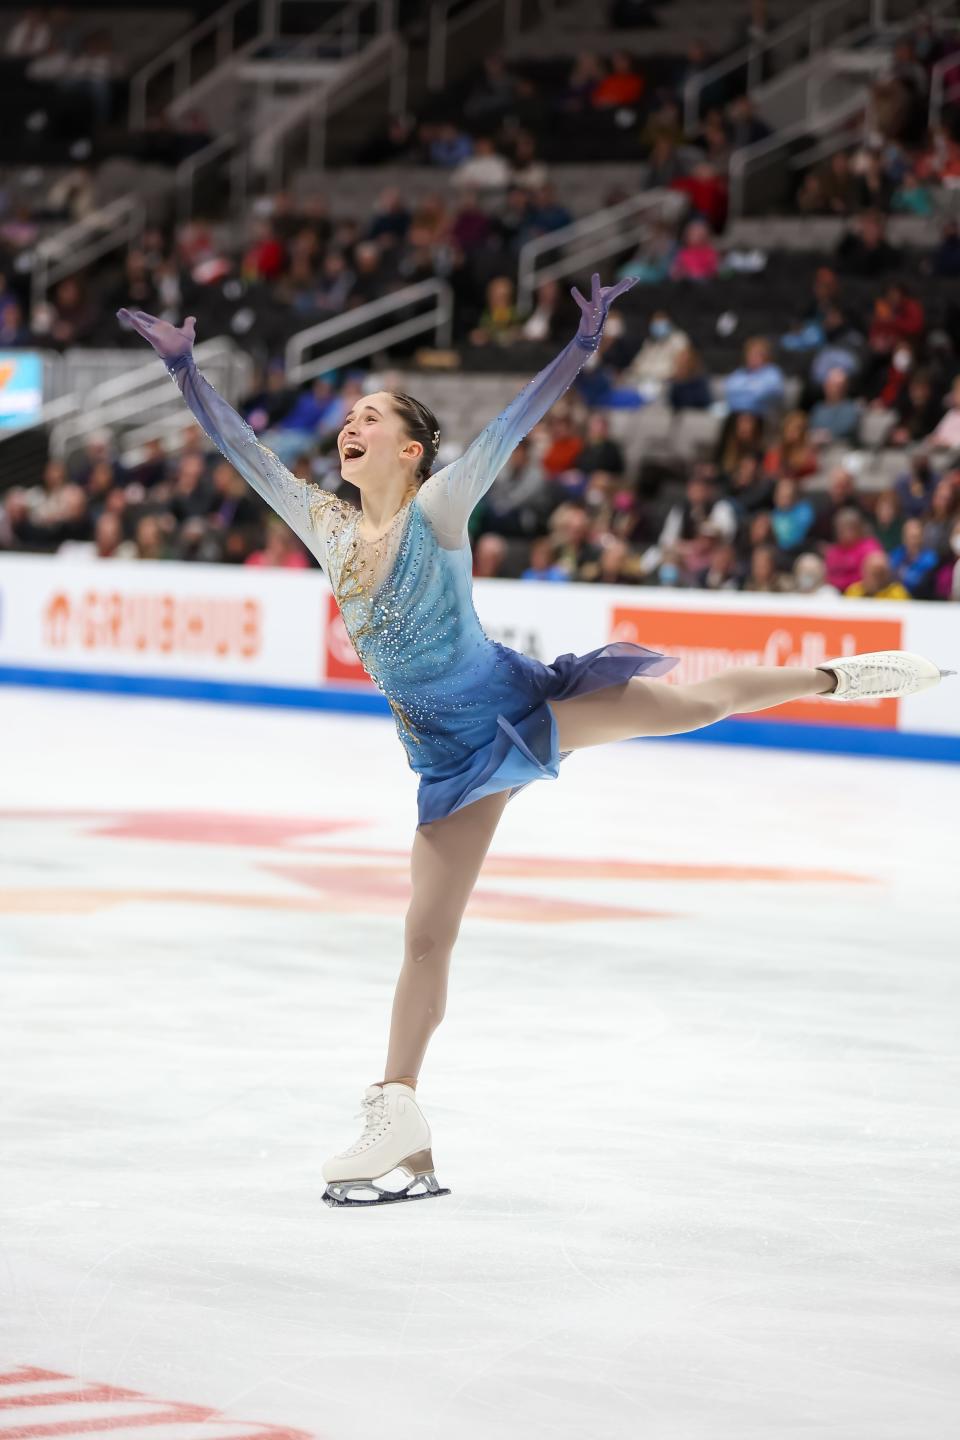 Isabeau Levito is among the skaters slated to perform at the U.S. Figure Skating Championships.